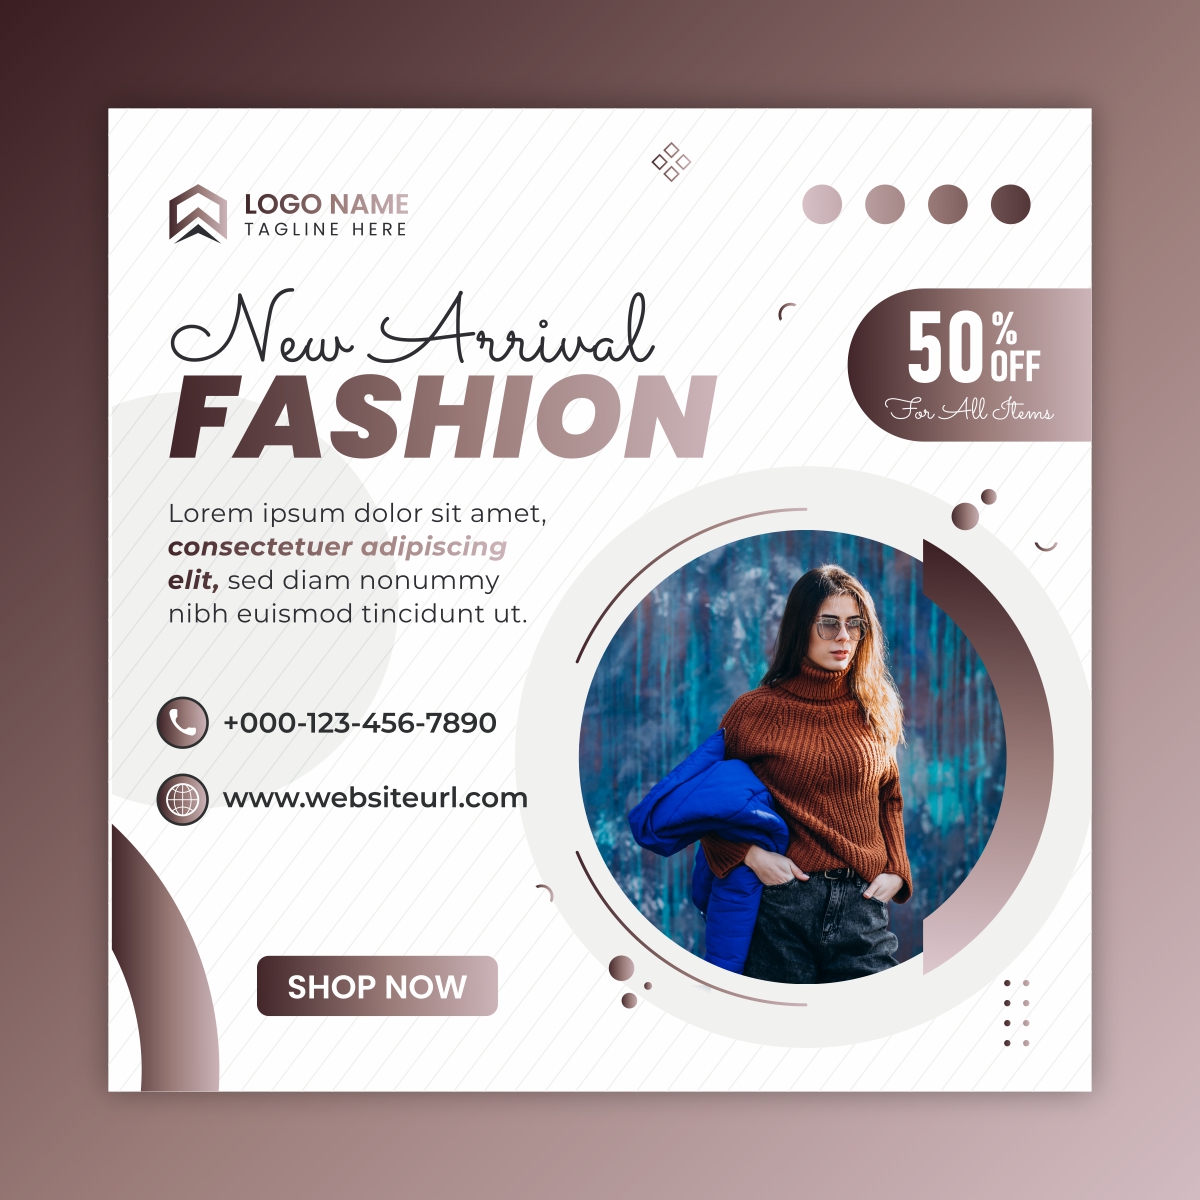 New Arrival fashion sale poster design download for free